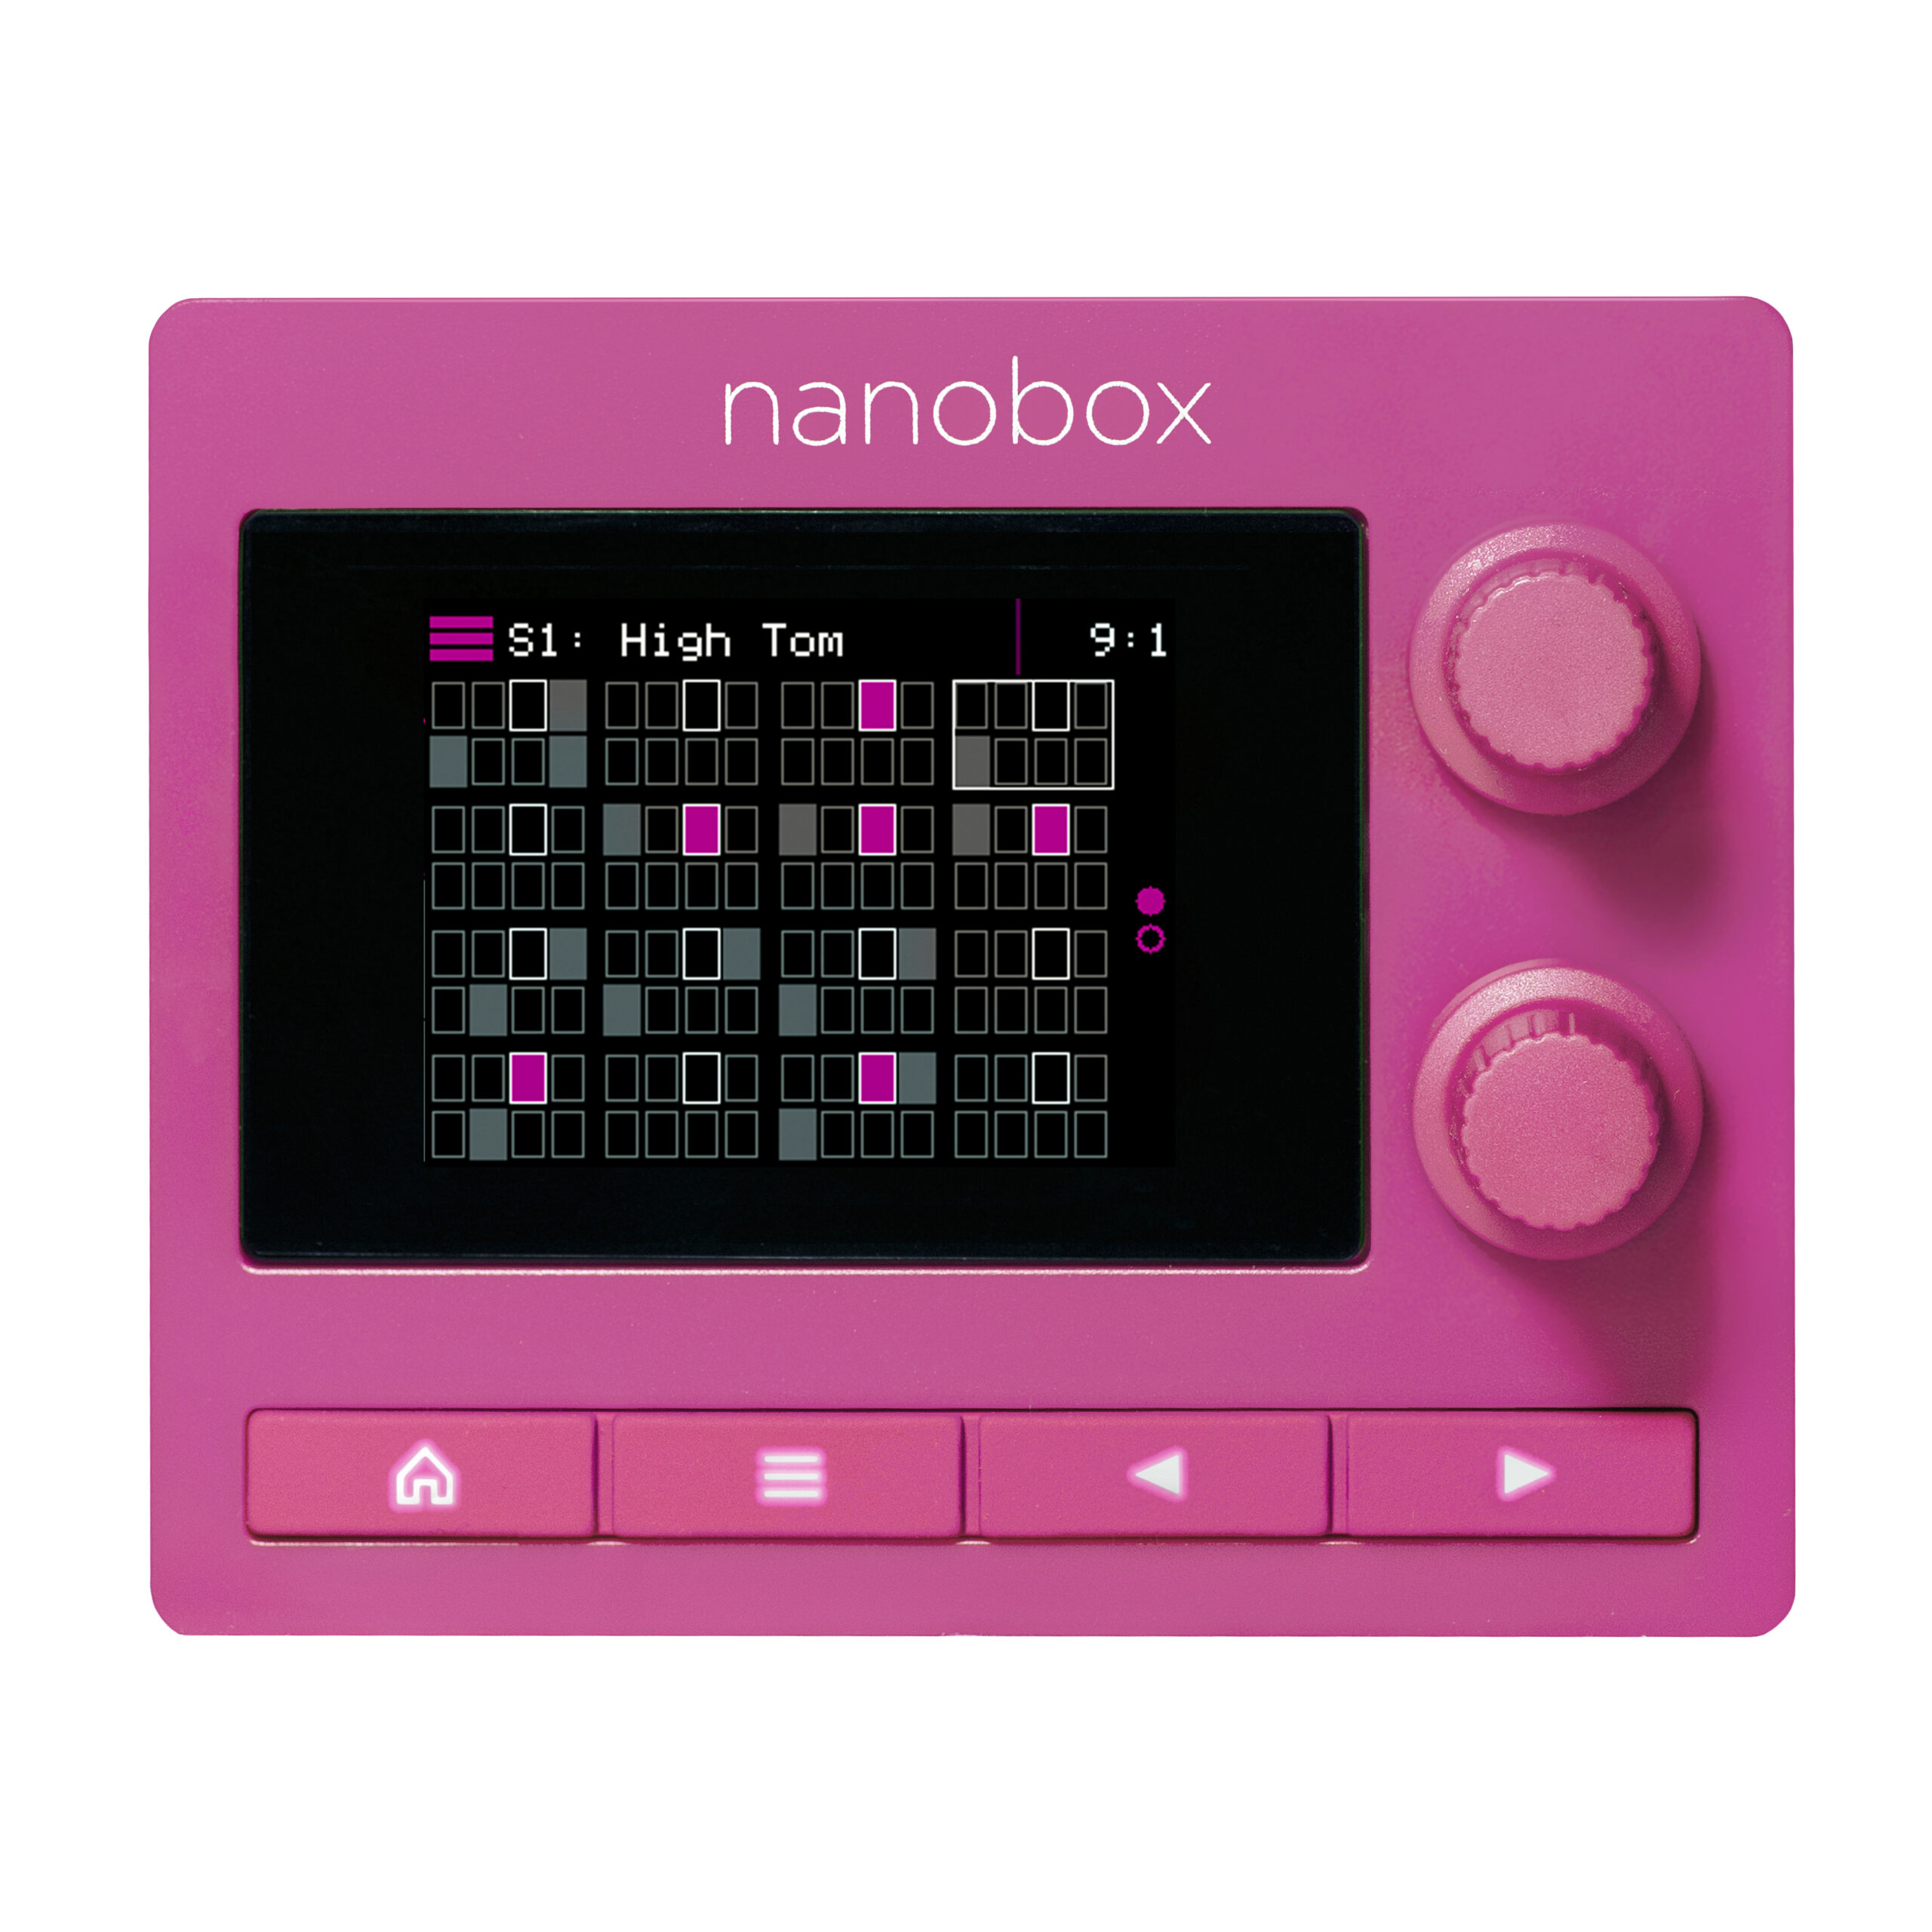 nanobox | razzmatazz - Mini Drum Sequencer with FM Synthesis and Sampling